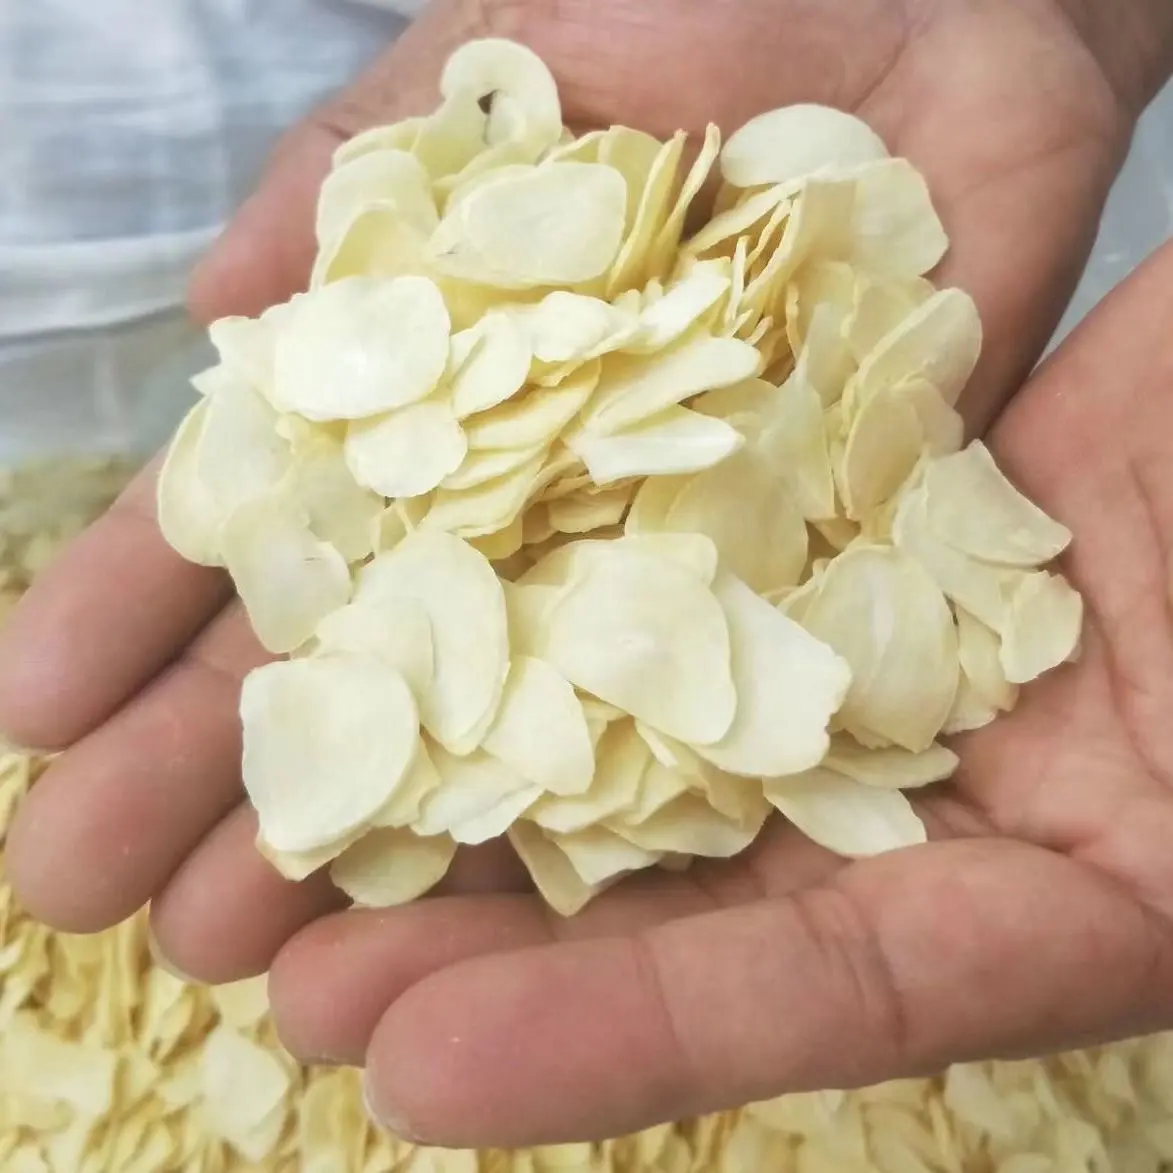 GXWW Guangxi New Crop First Dried Style Pure White Dry Garlic Flake Peeled Garlic Price